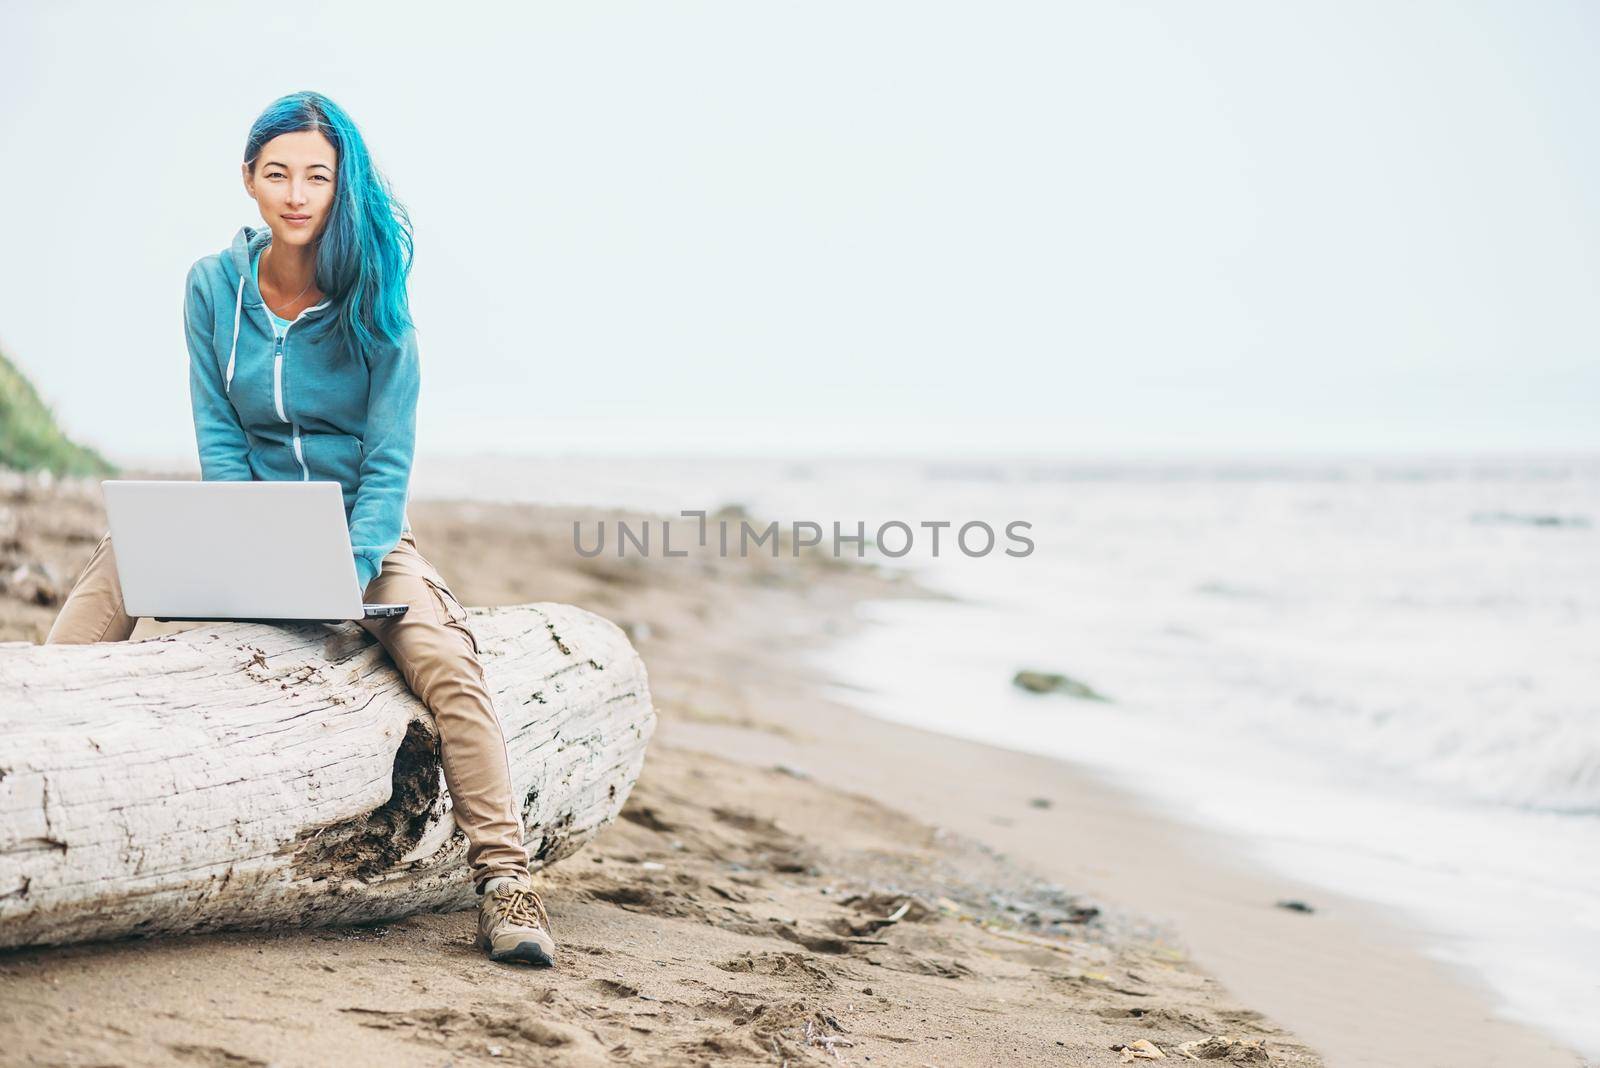 Smiling freelancer girl with blue hair working on laptop on sand beach near the sea, looking at camera. Freelance concept